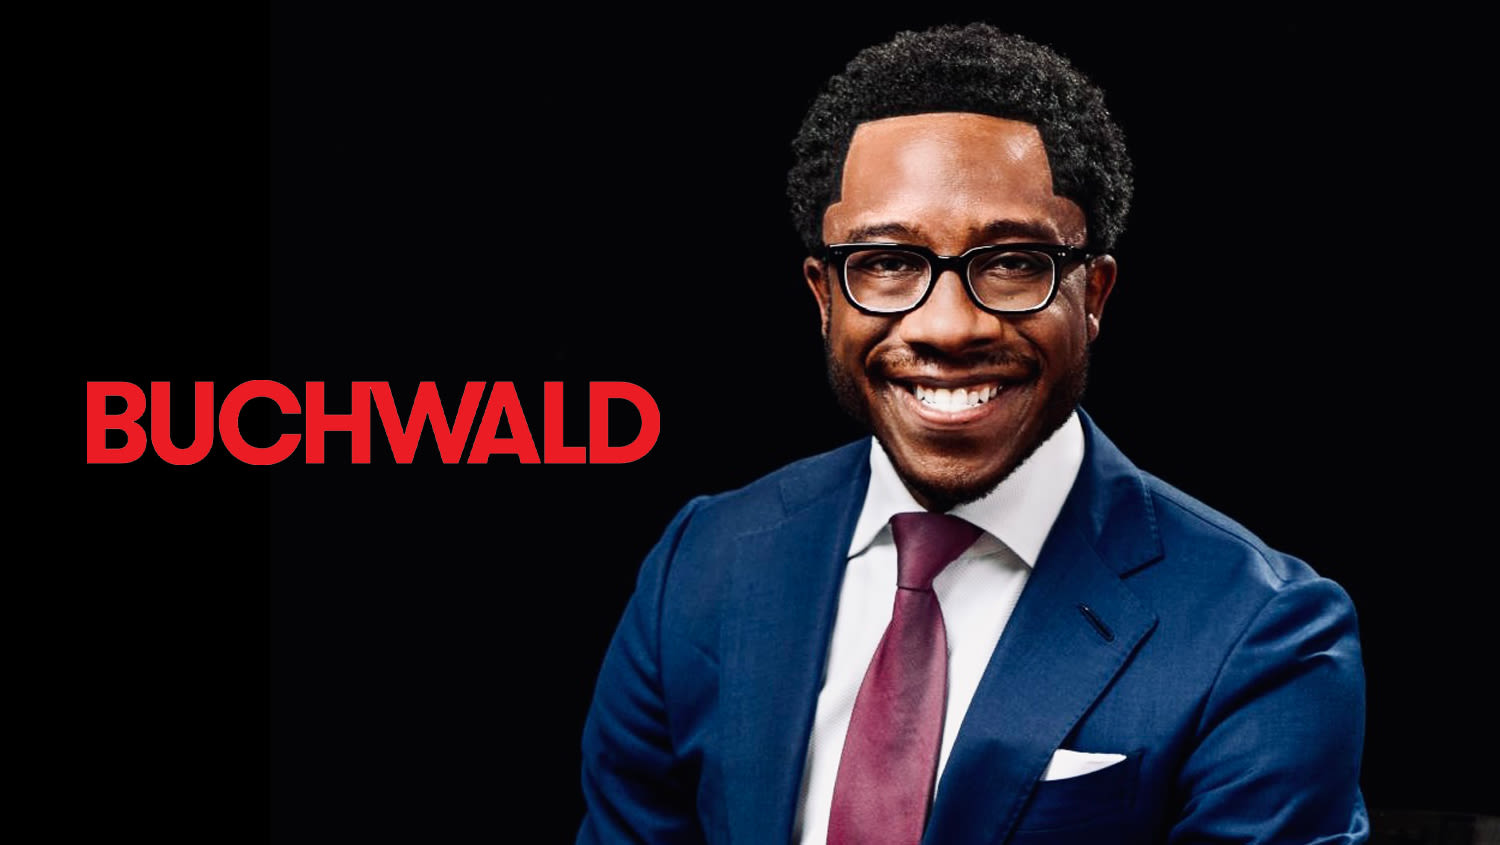 Michael Leach, First White House Chief Diversity Officer, Signs With Buchwald For Representation